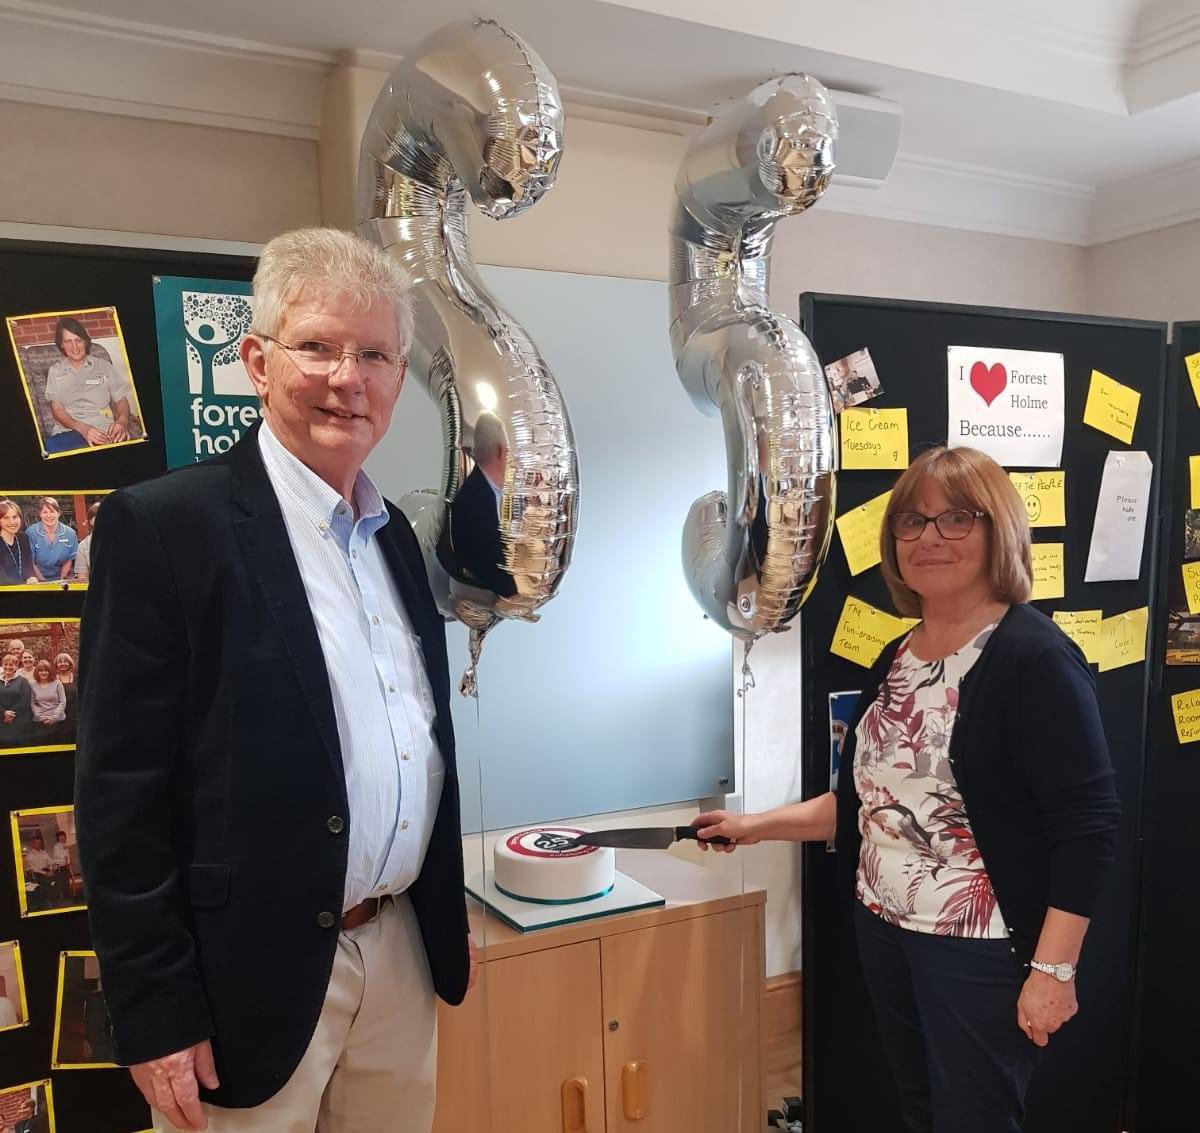 In 2019, Sheila Banyard, who started as a Nurse at Forest Holme Hospice on the very first day it opened in 1994, returned to cut a celebratory cake with Dr Kirkham at a 25th anniversary staff party #ThrowBackThursday #30thanniversary #30YearsOfCare